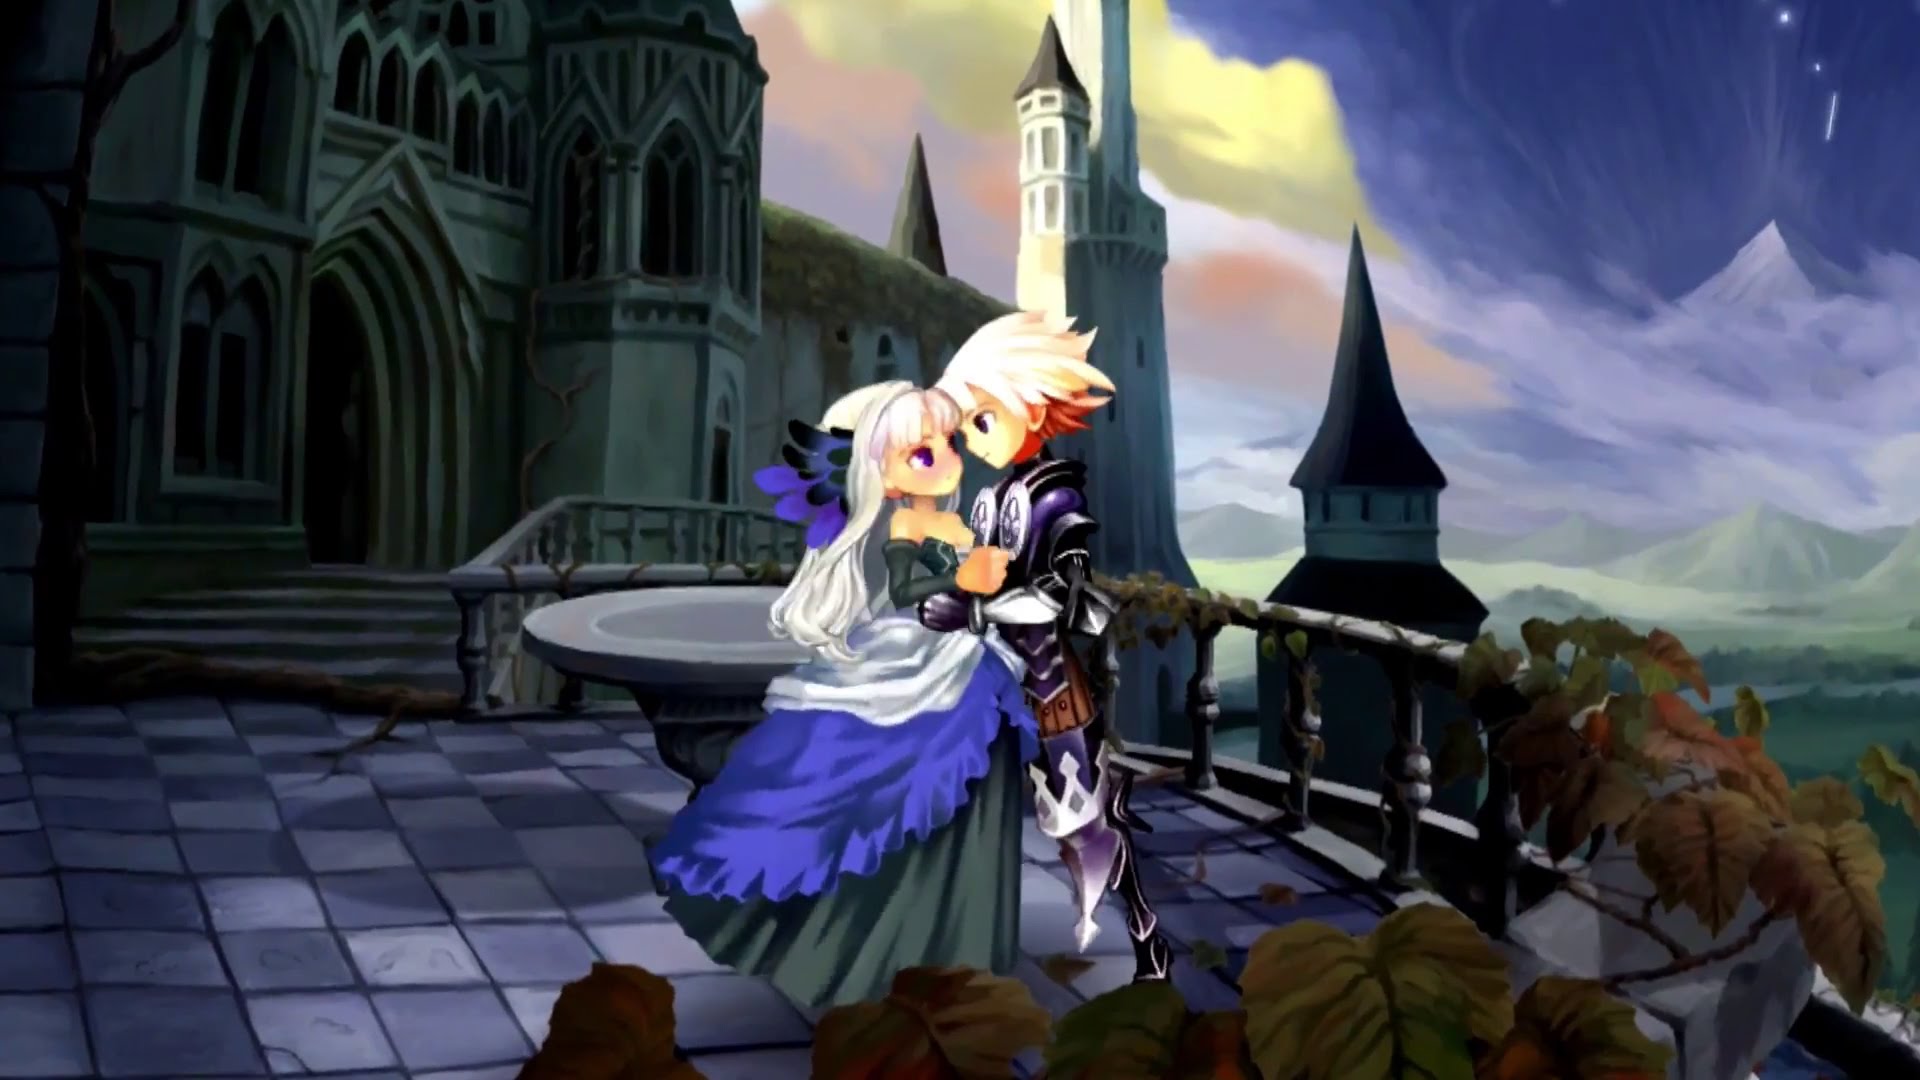 Oswald and Gwendolyn (Odin Sphere) - Video Game Couples